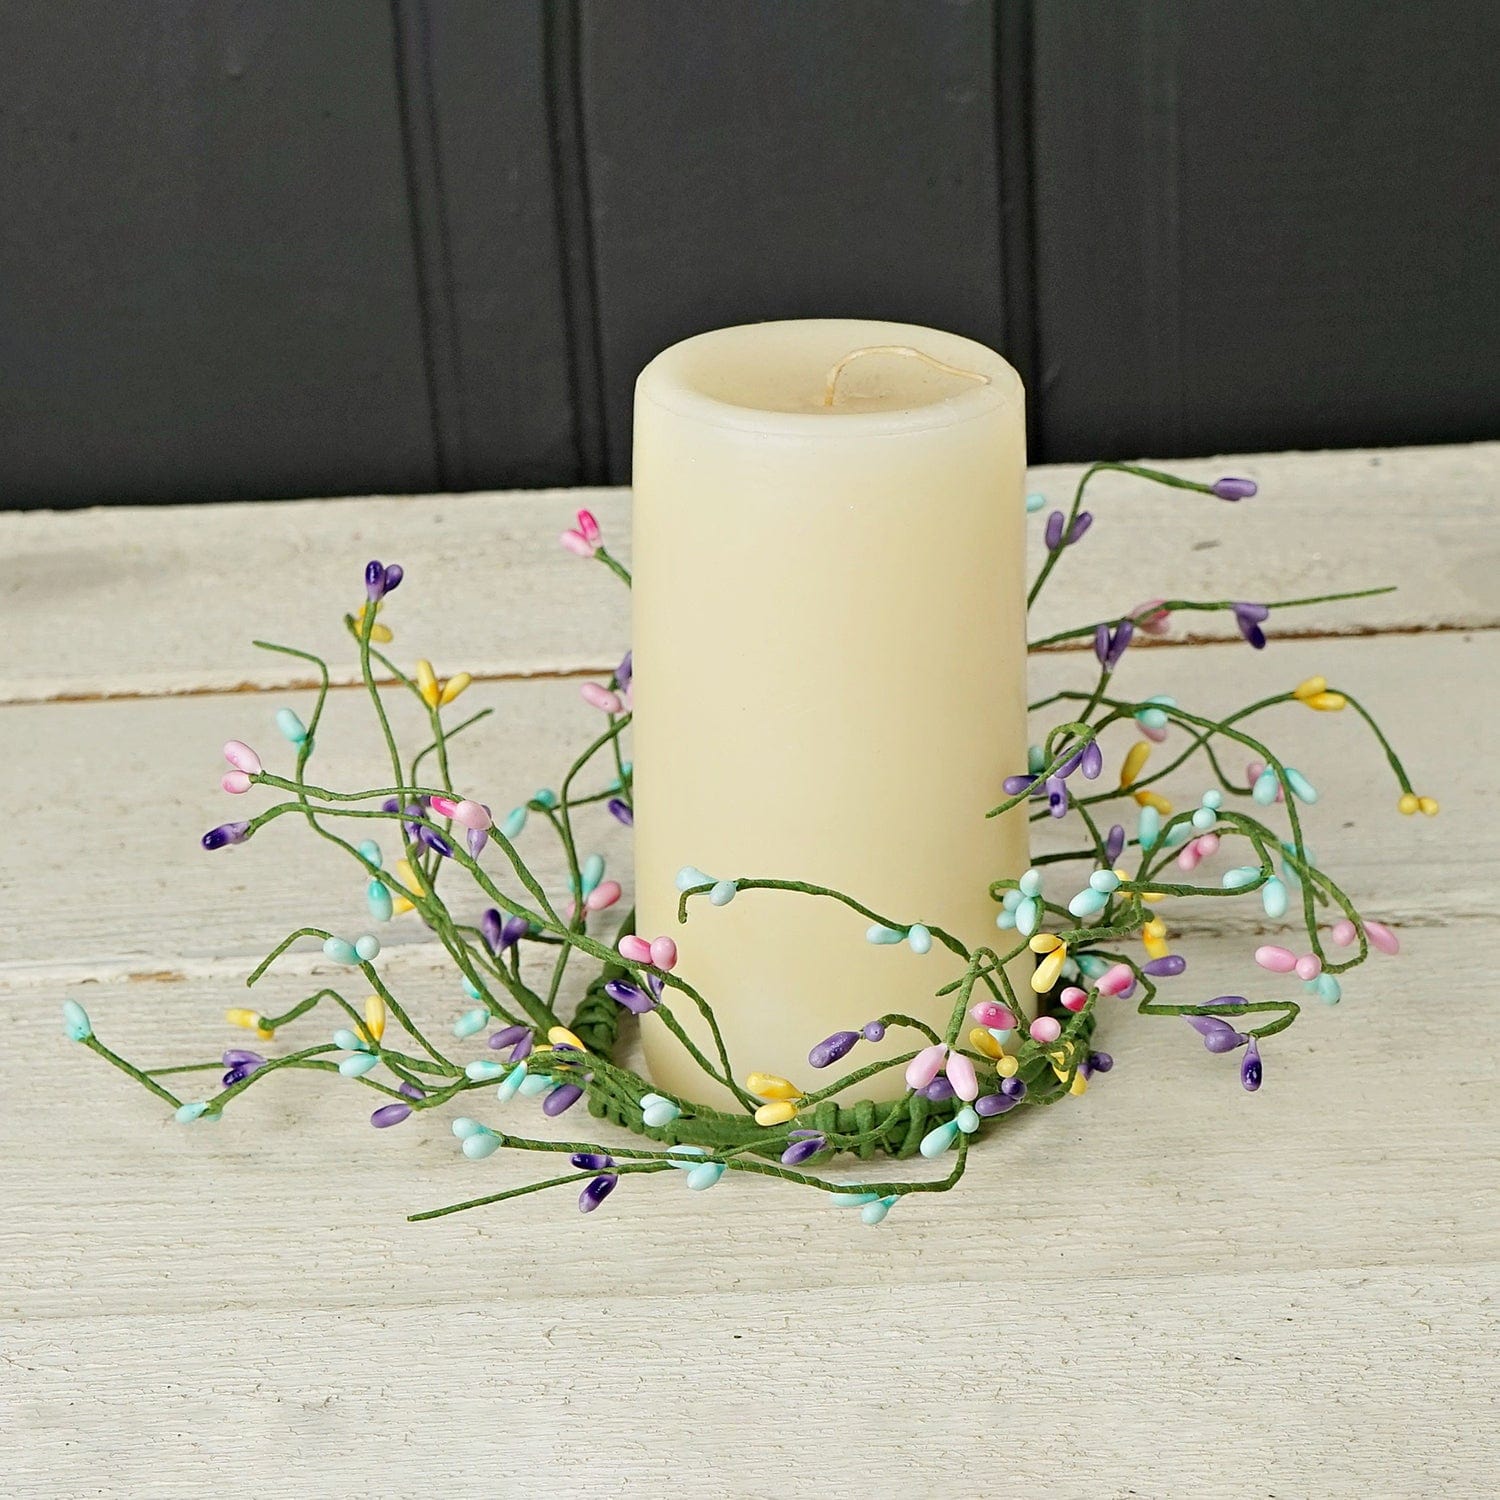 pip berry happy spring candle ring wreath 3 5 inner diameter